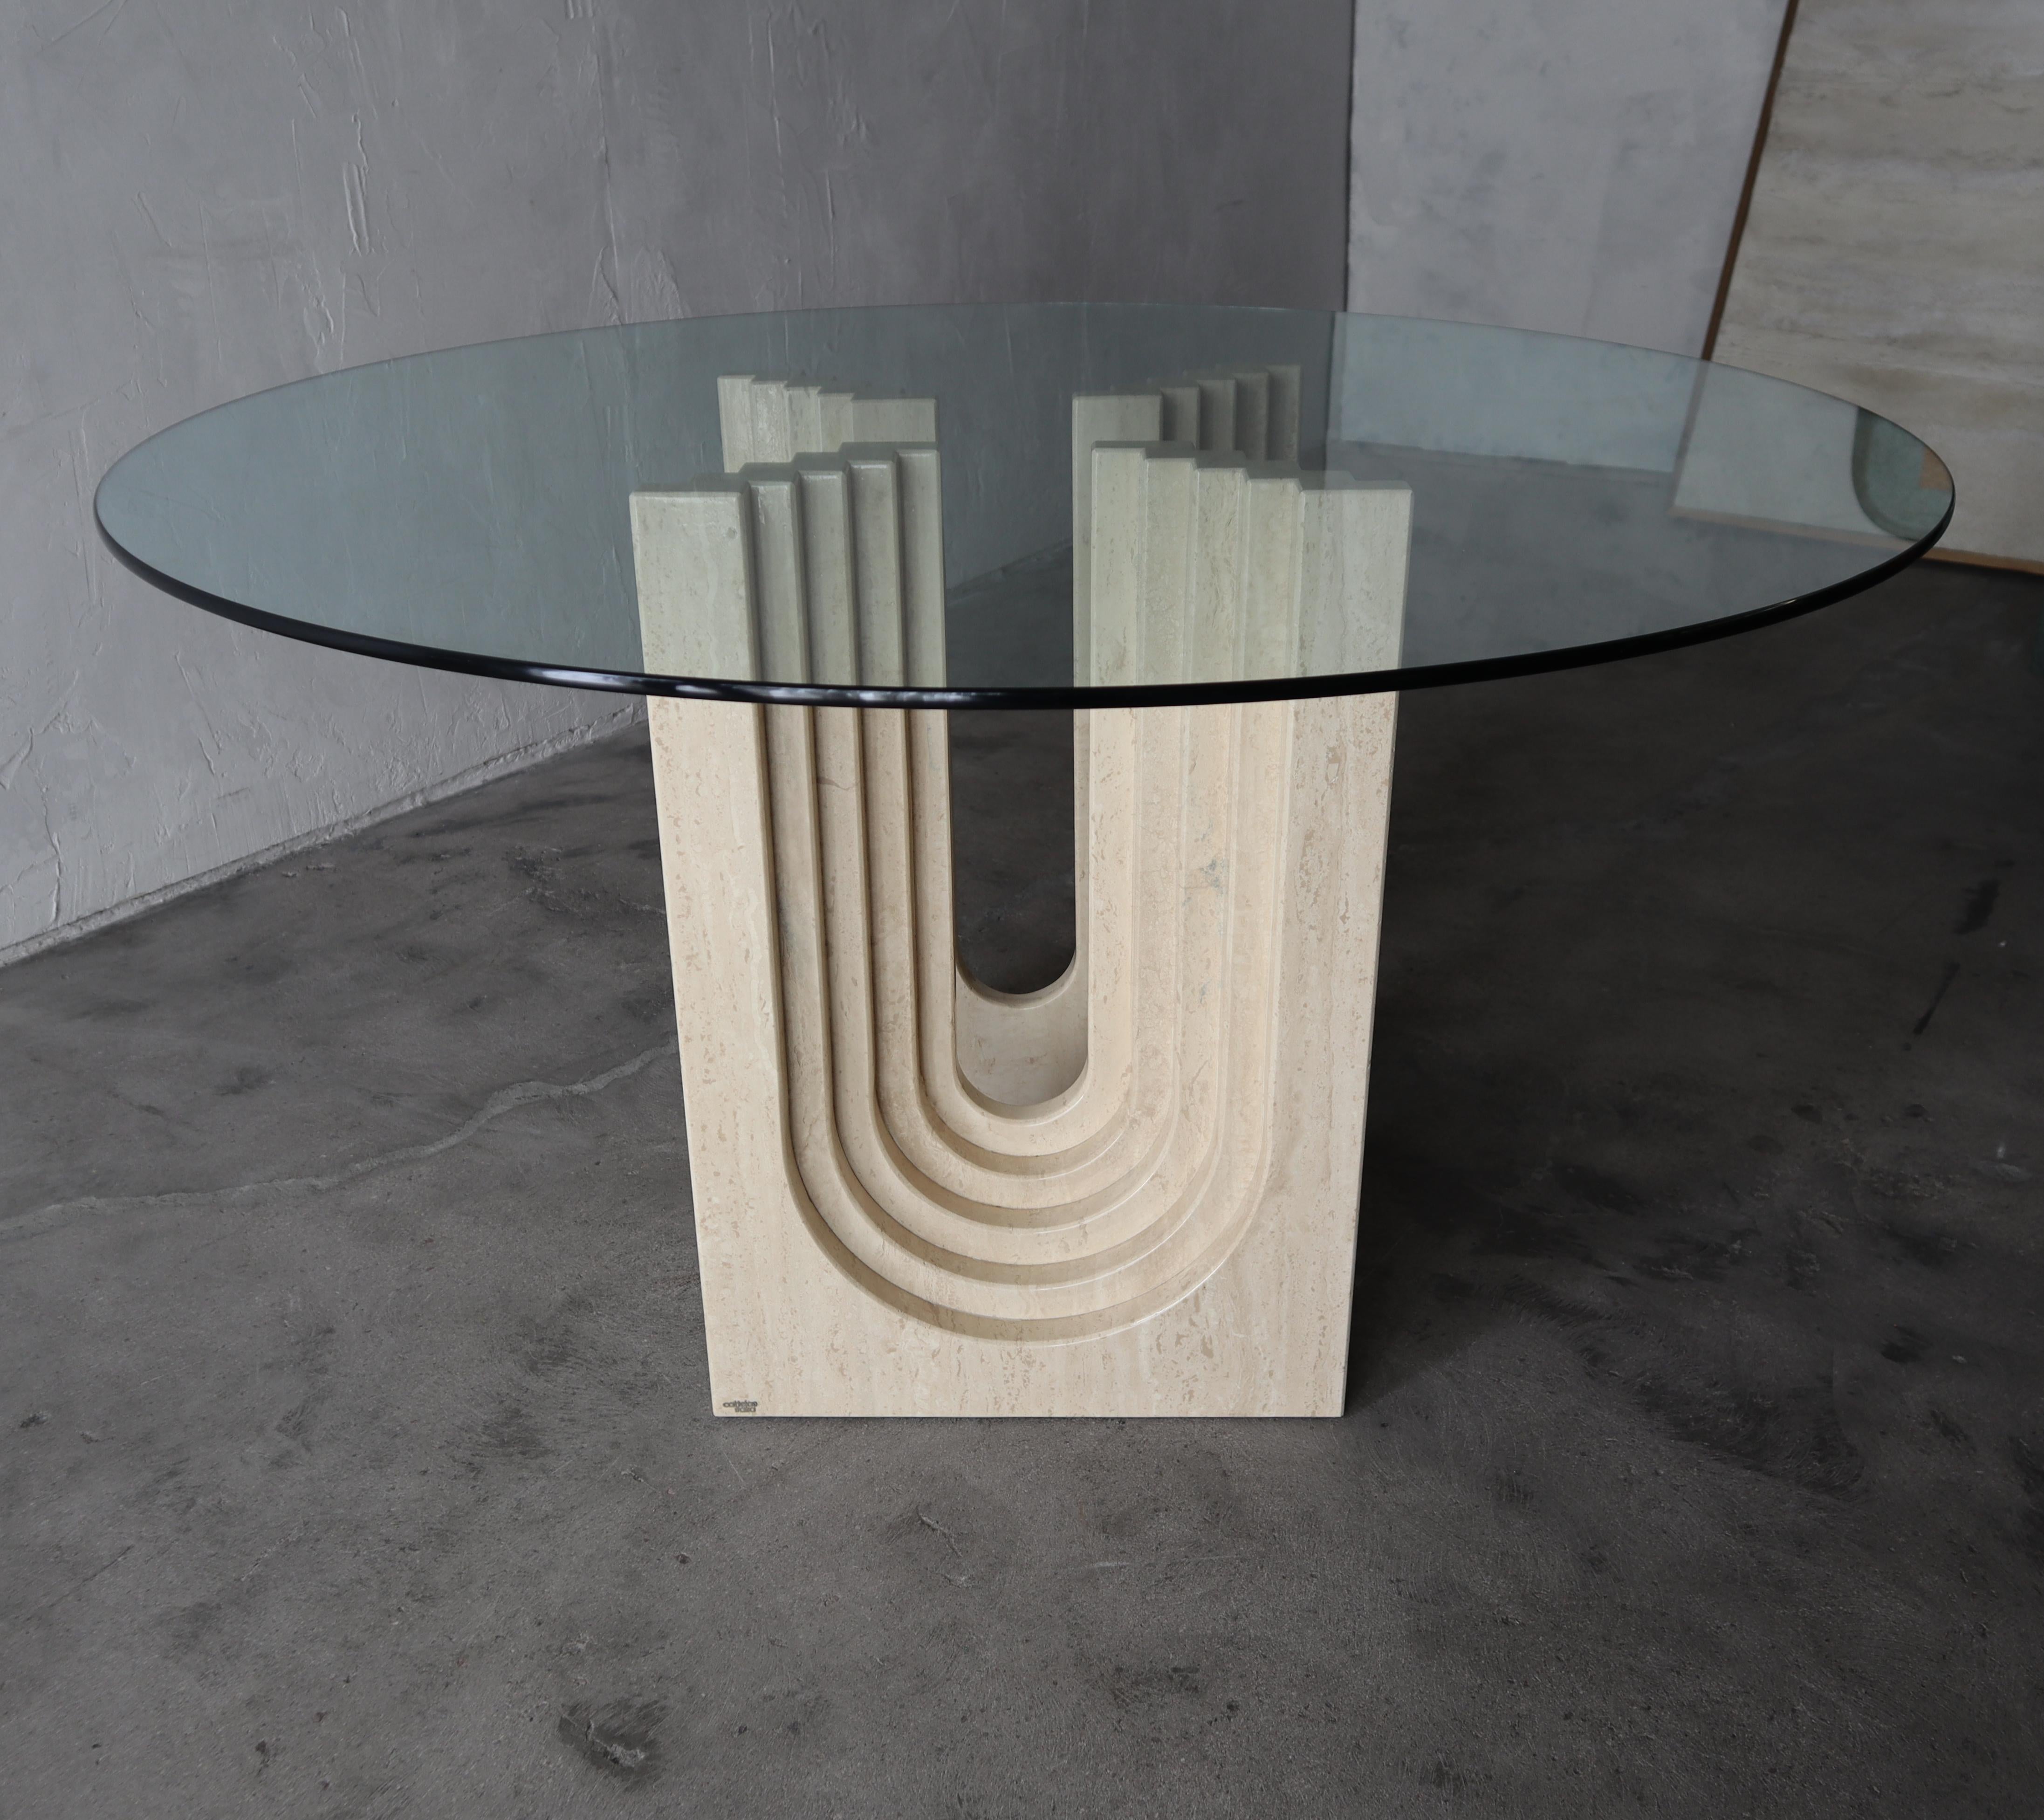 Nothing short of amazing. A pair of solid, polished travertine pedestals by Carlo Scarpa for Cattelan Italia.  The pedestals are designed in a staggered, architectural arch pattern giving them extreme depth and interest. 

Shown as a round dining